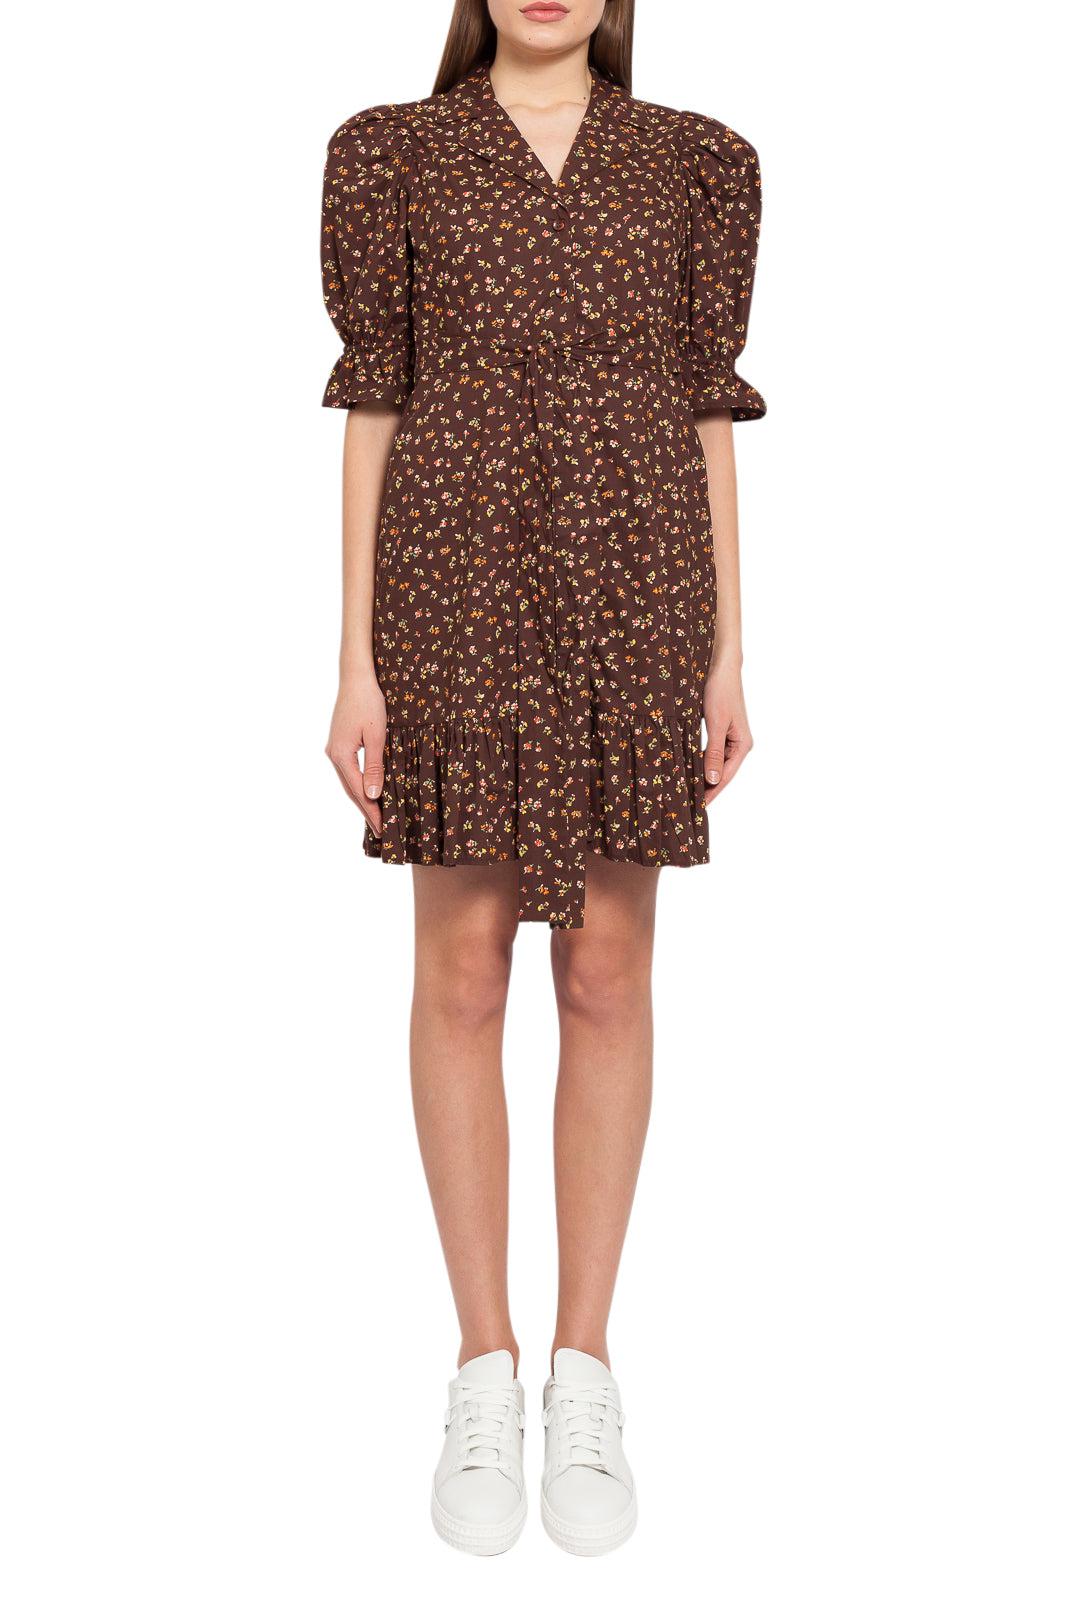 By Timo-Floral pattern flared mini-dress-dgallerystore